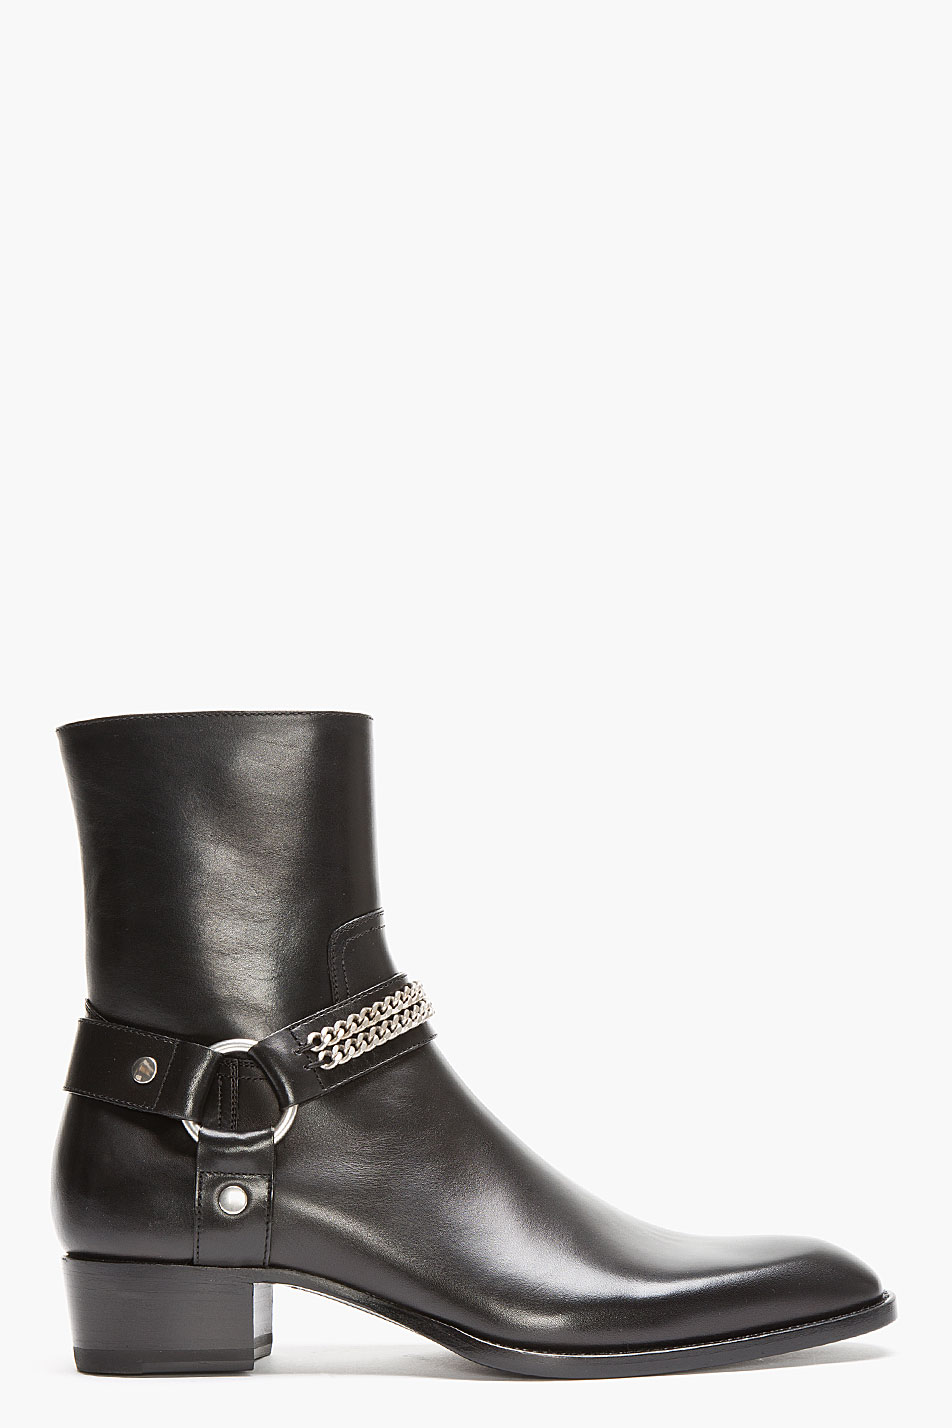 Saint Laurent Black Leather Chain and Zip Boots for Men | Lyst